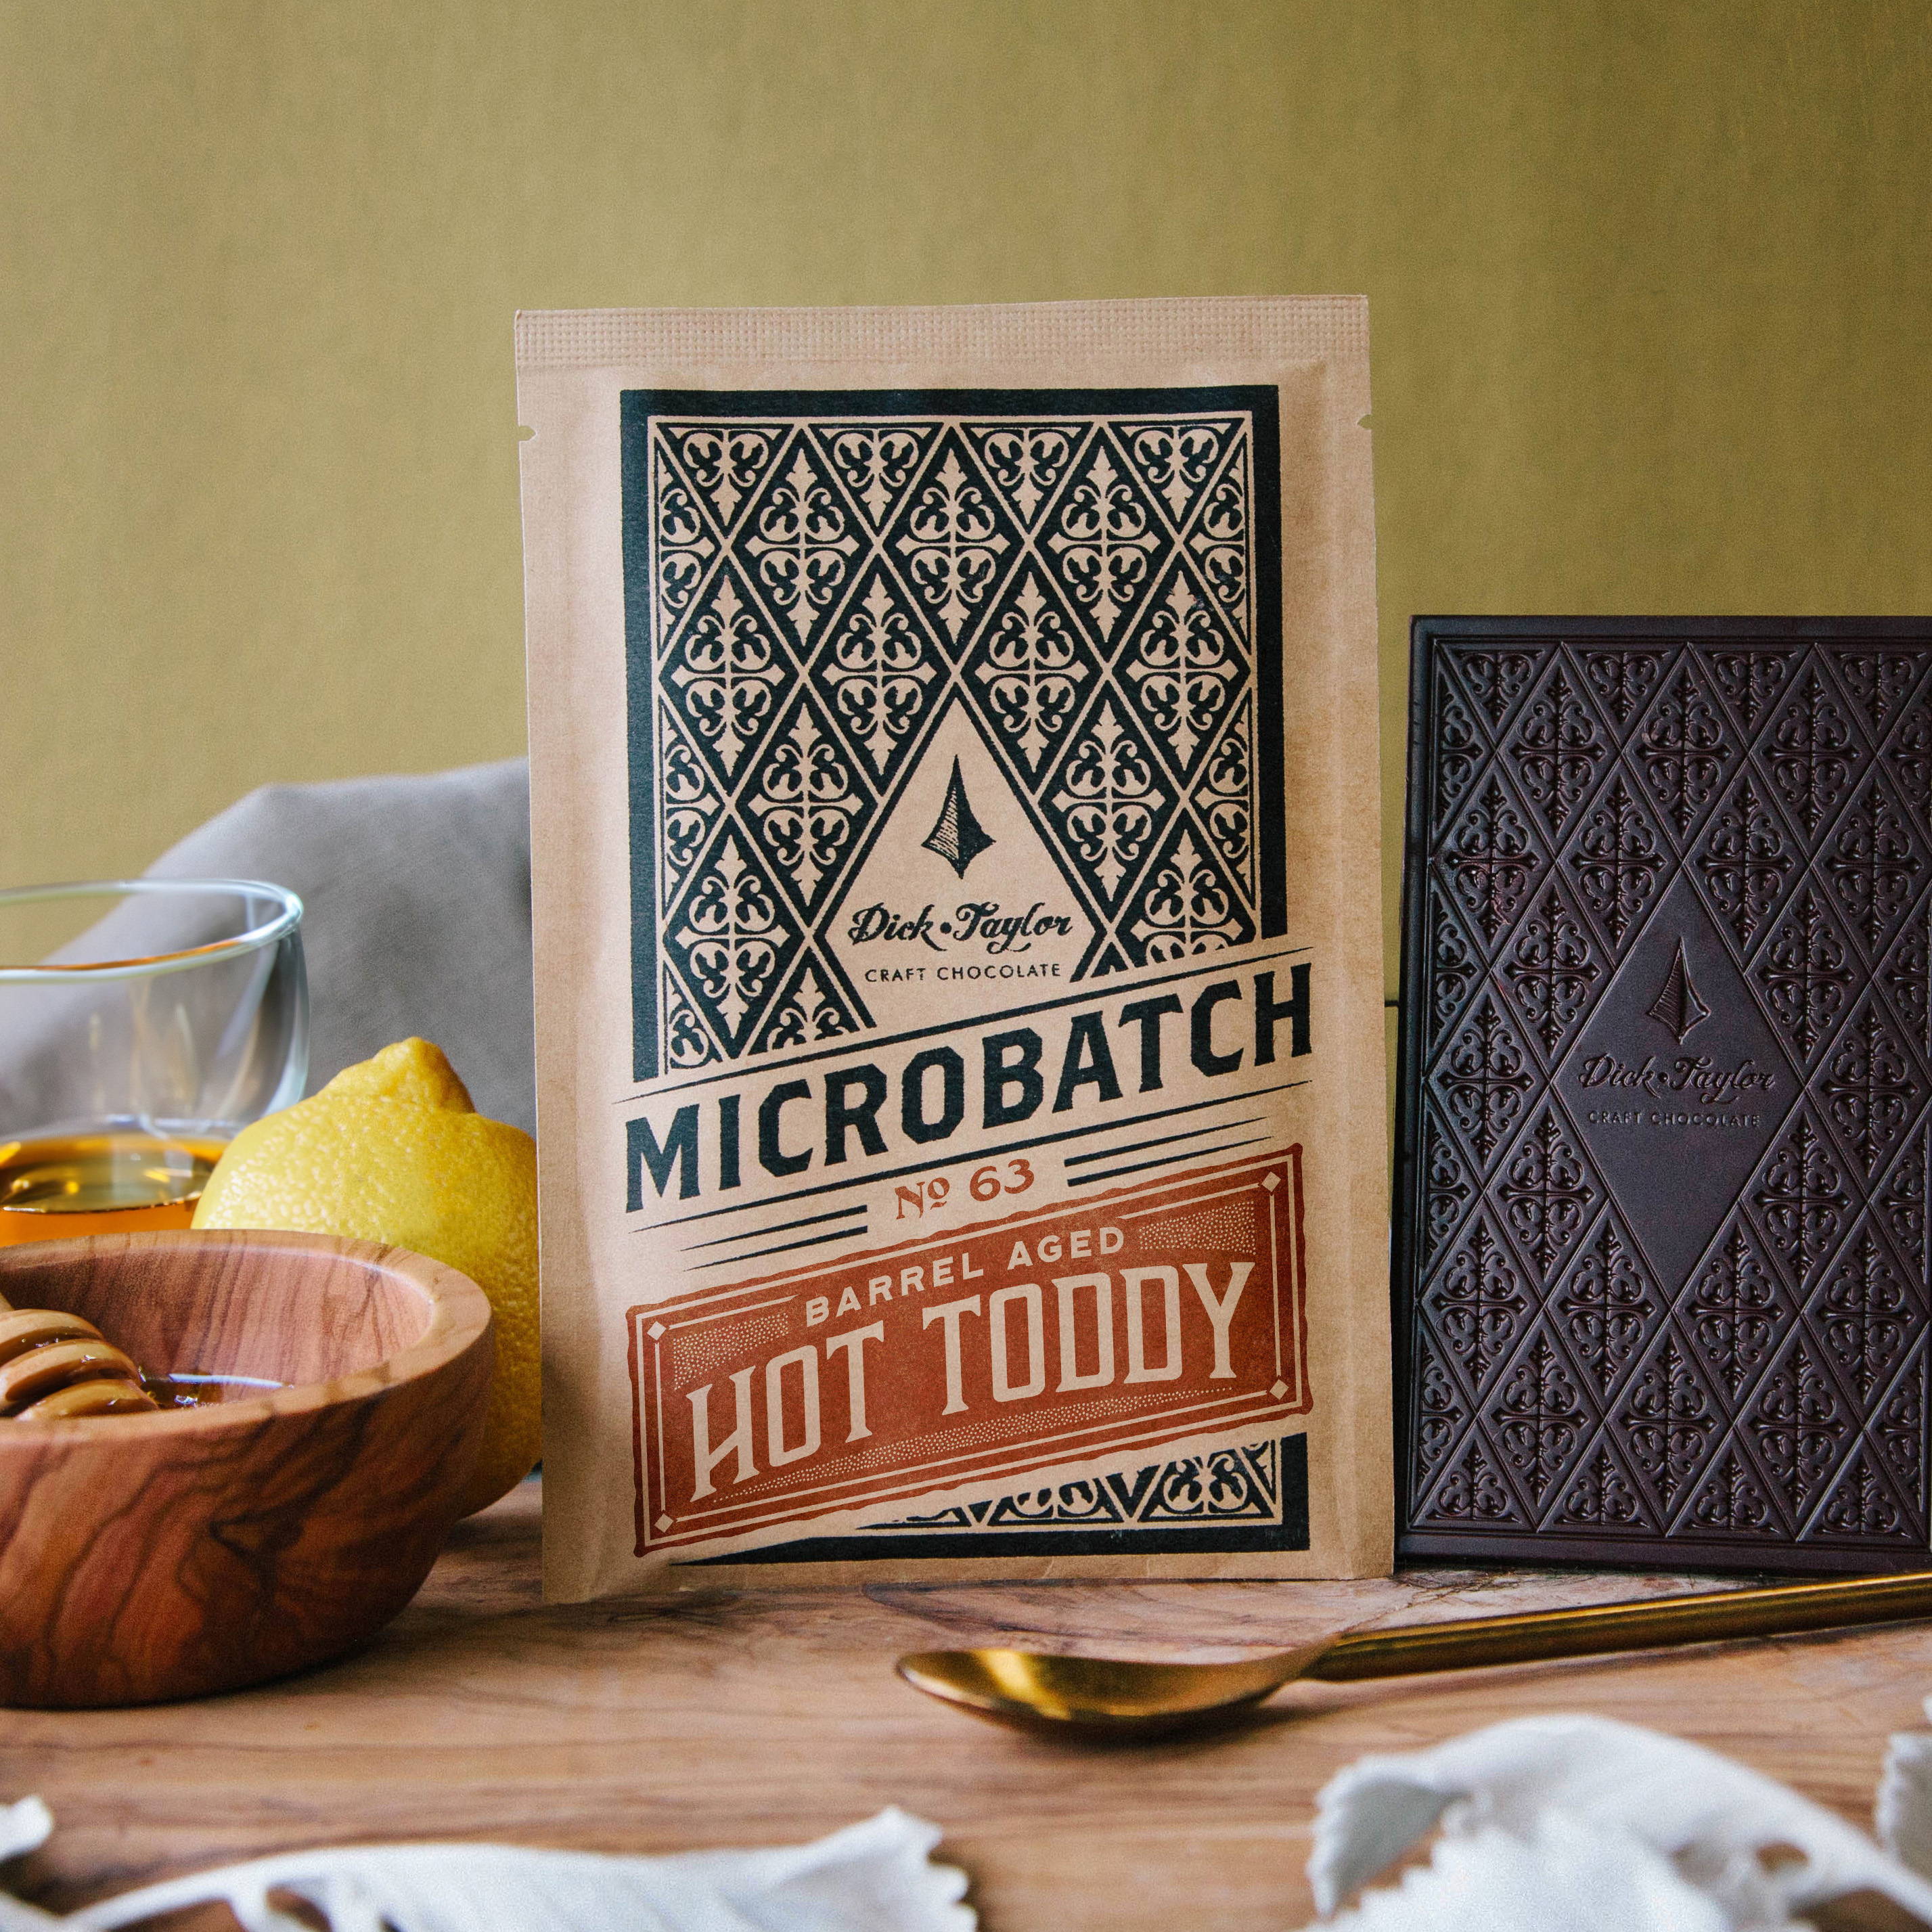 Hot Toddy microbatch